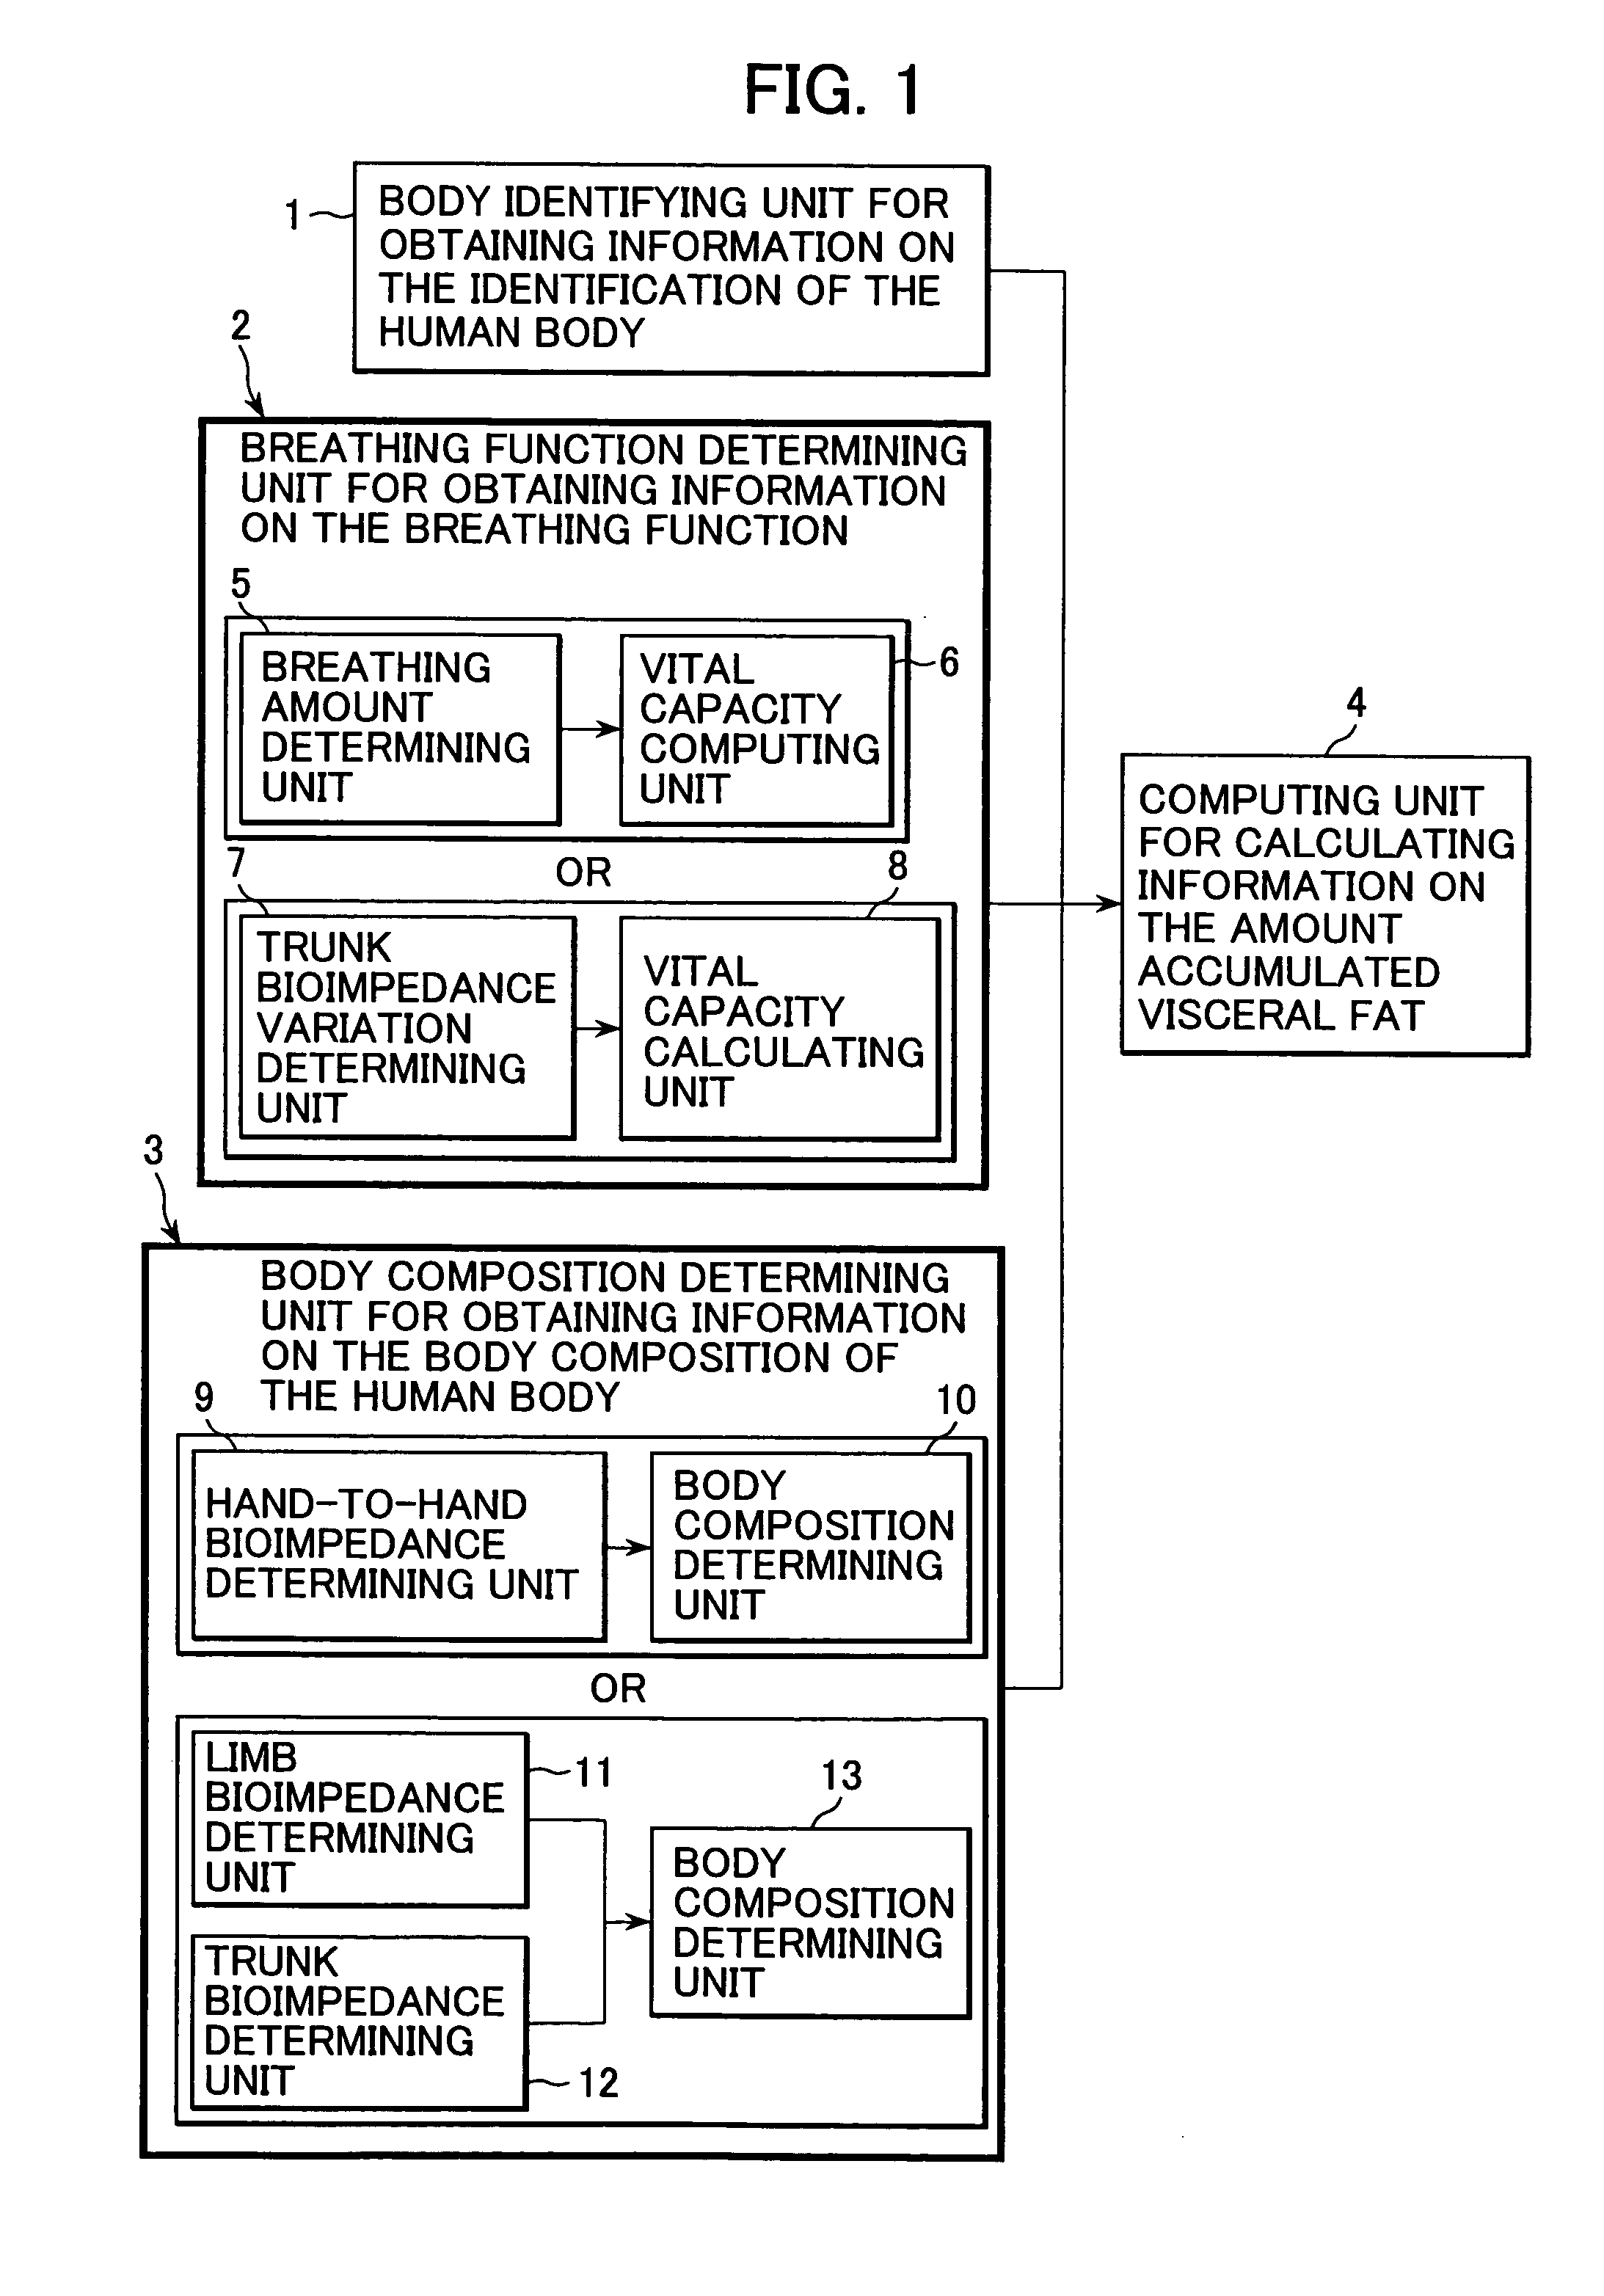 Apparatus for assuming information on the amount accumulated visceral fat of a human body